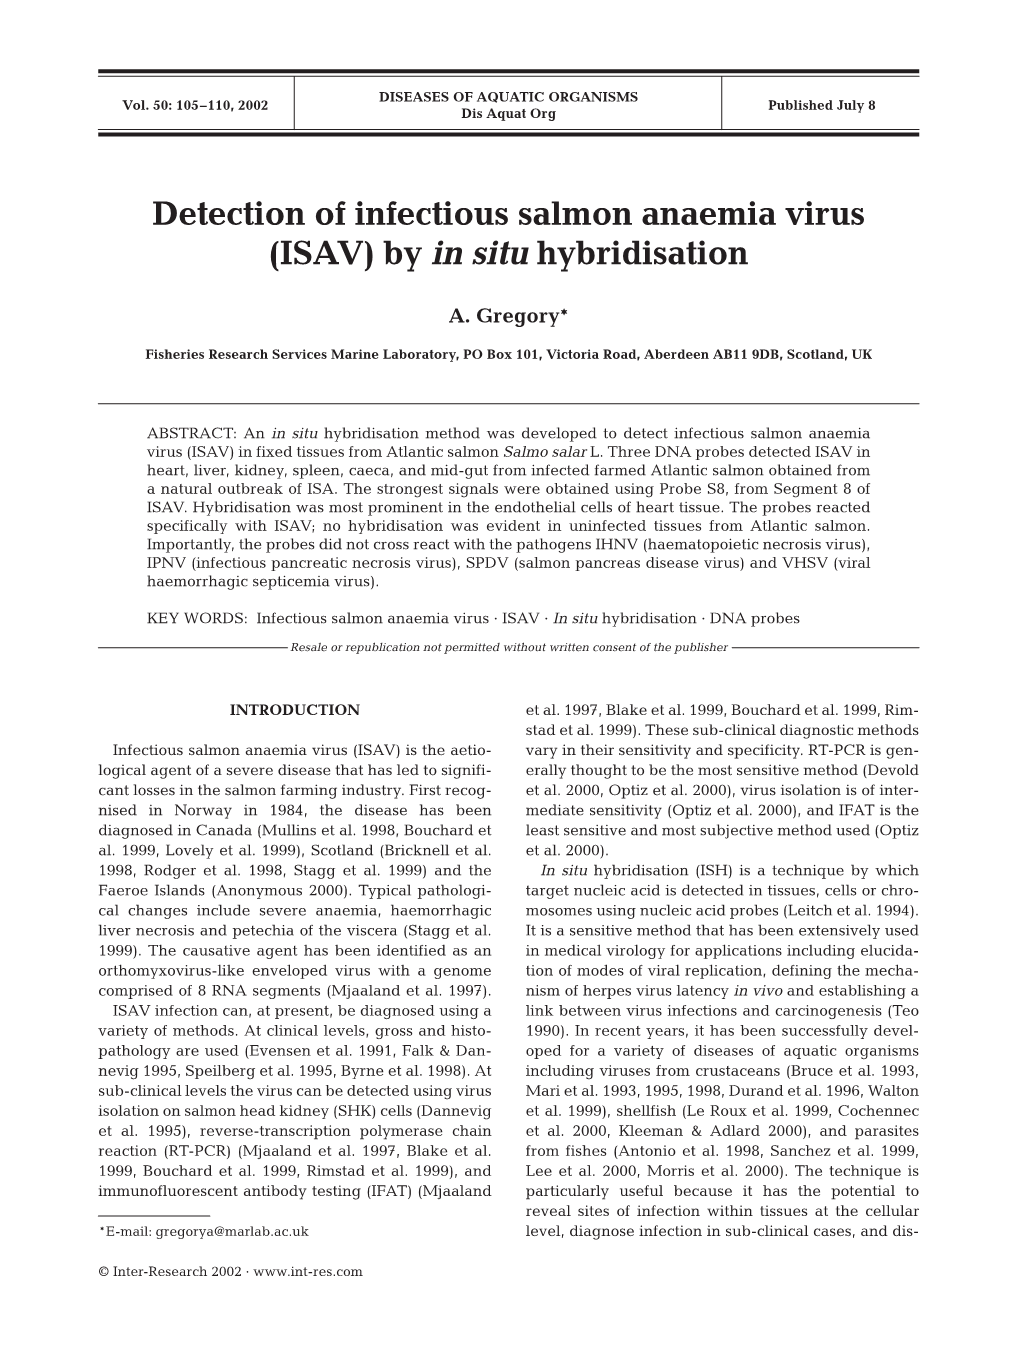 Detection of Infectious Salmon Anaemia Virus (ISAV) by in Situ Hybridisation